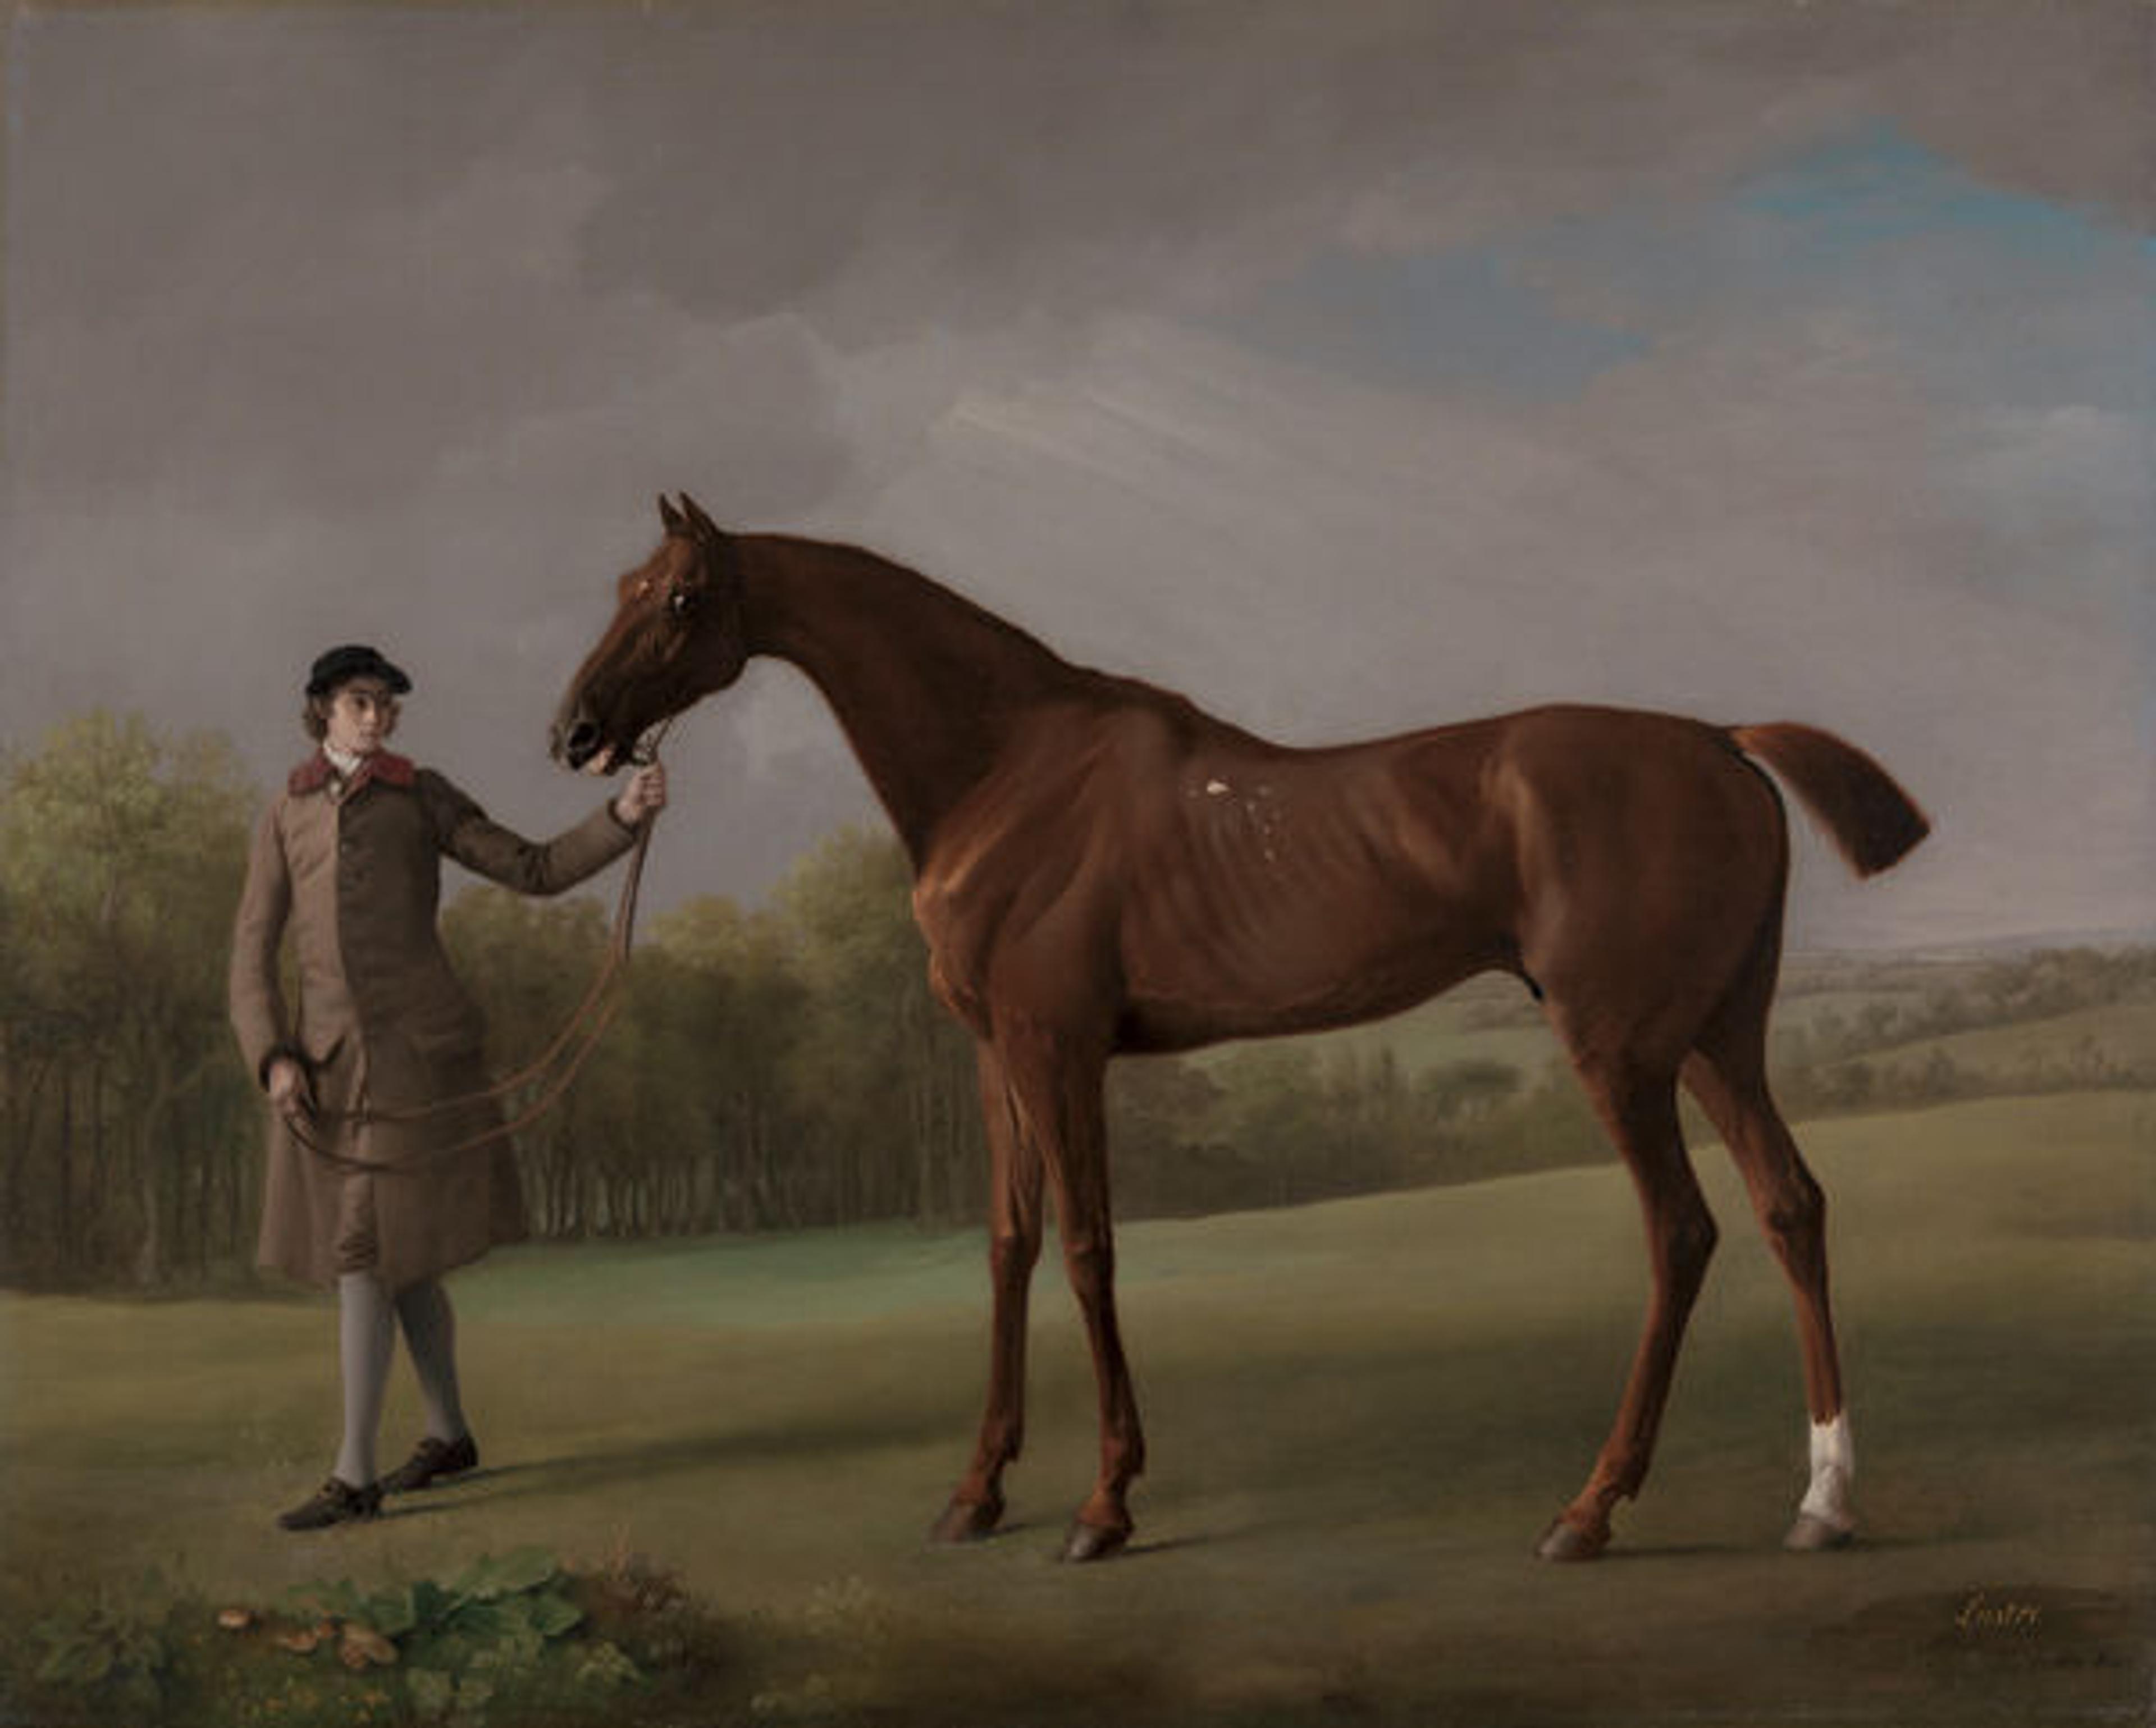 George Stubbs (British, 1724–1806). Lustre, Held by a Groom, ca. 1762. Oil on canvas; 40 1/8 in. × 50 in. (101.9 × 127 cm). Yale Center for British Art, Paul Mellon Collection